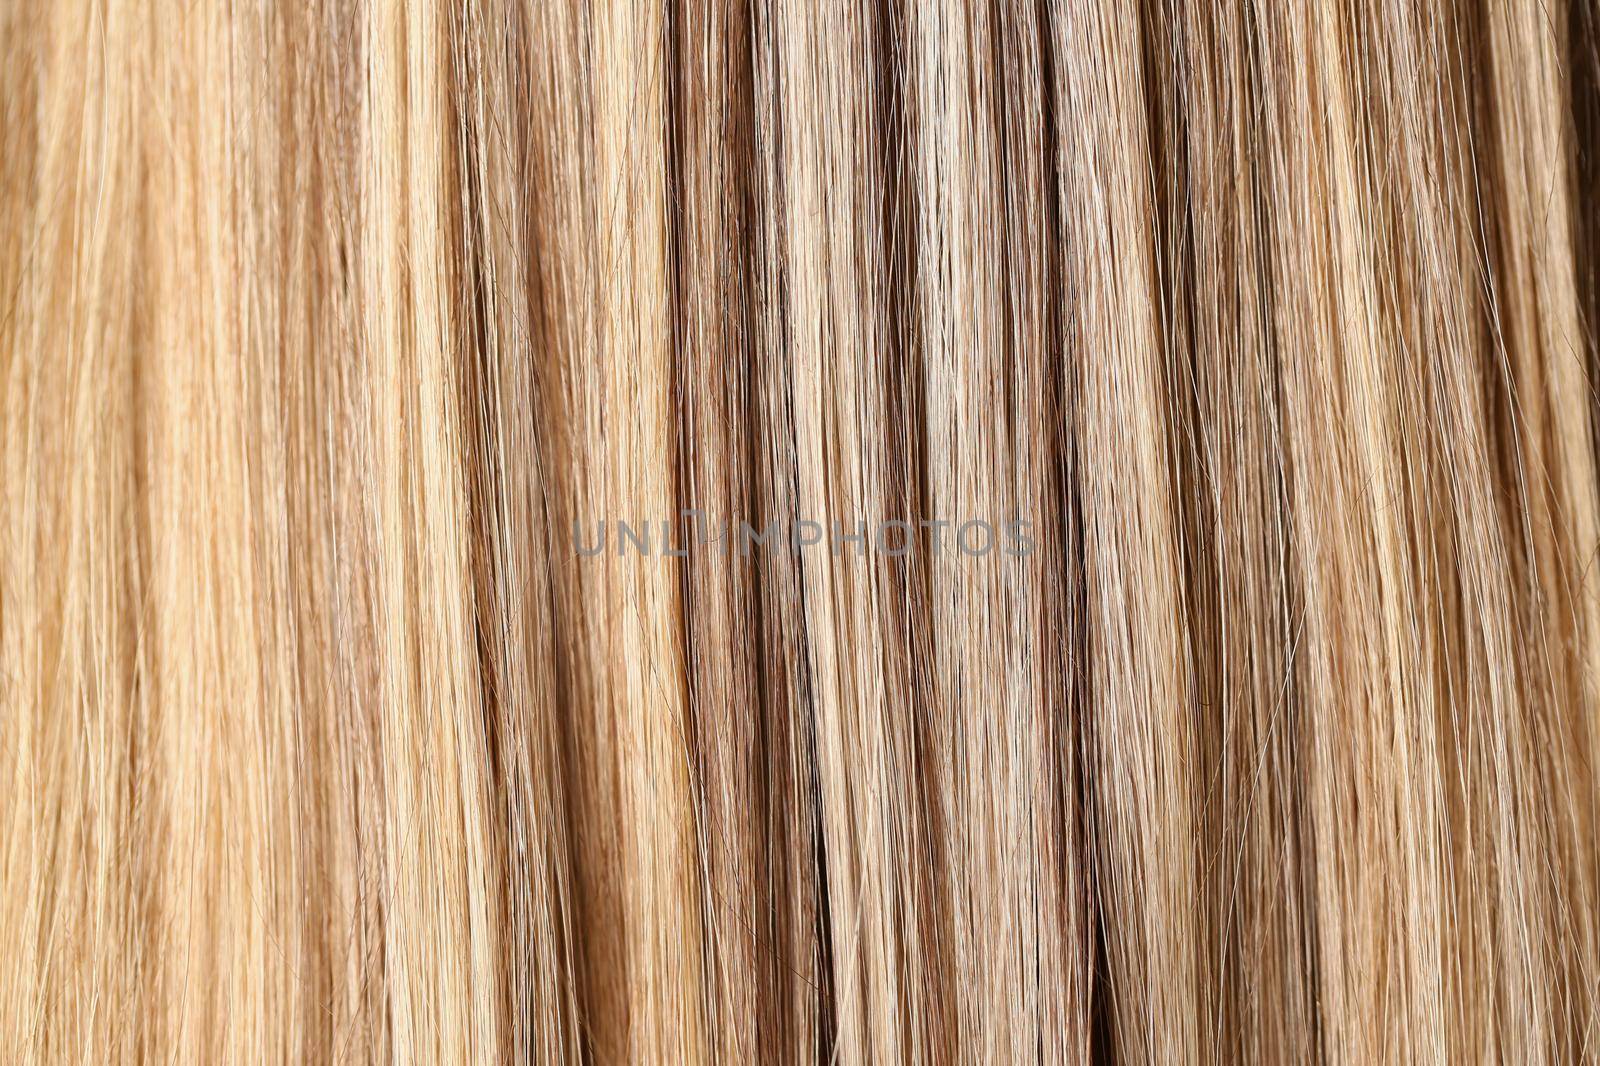 Female hair after highlighting procedure in beauty salon, shiny shades of blonde by kuprevich